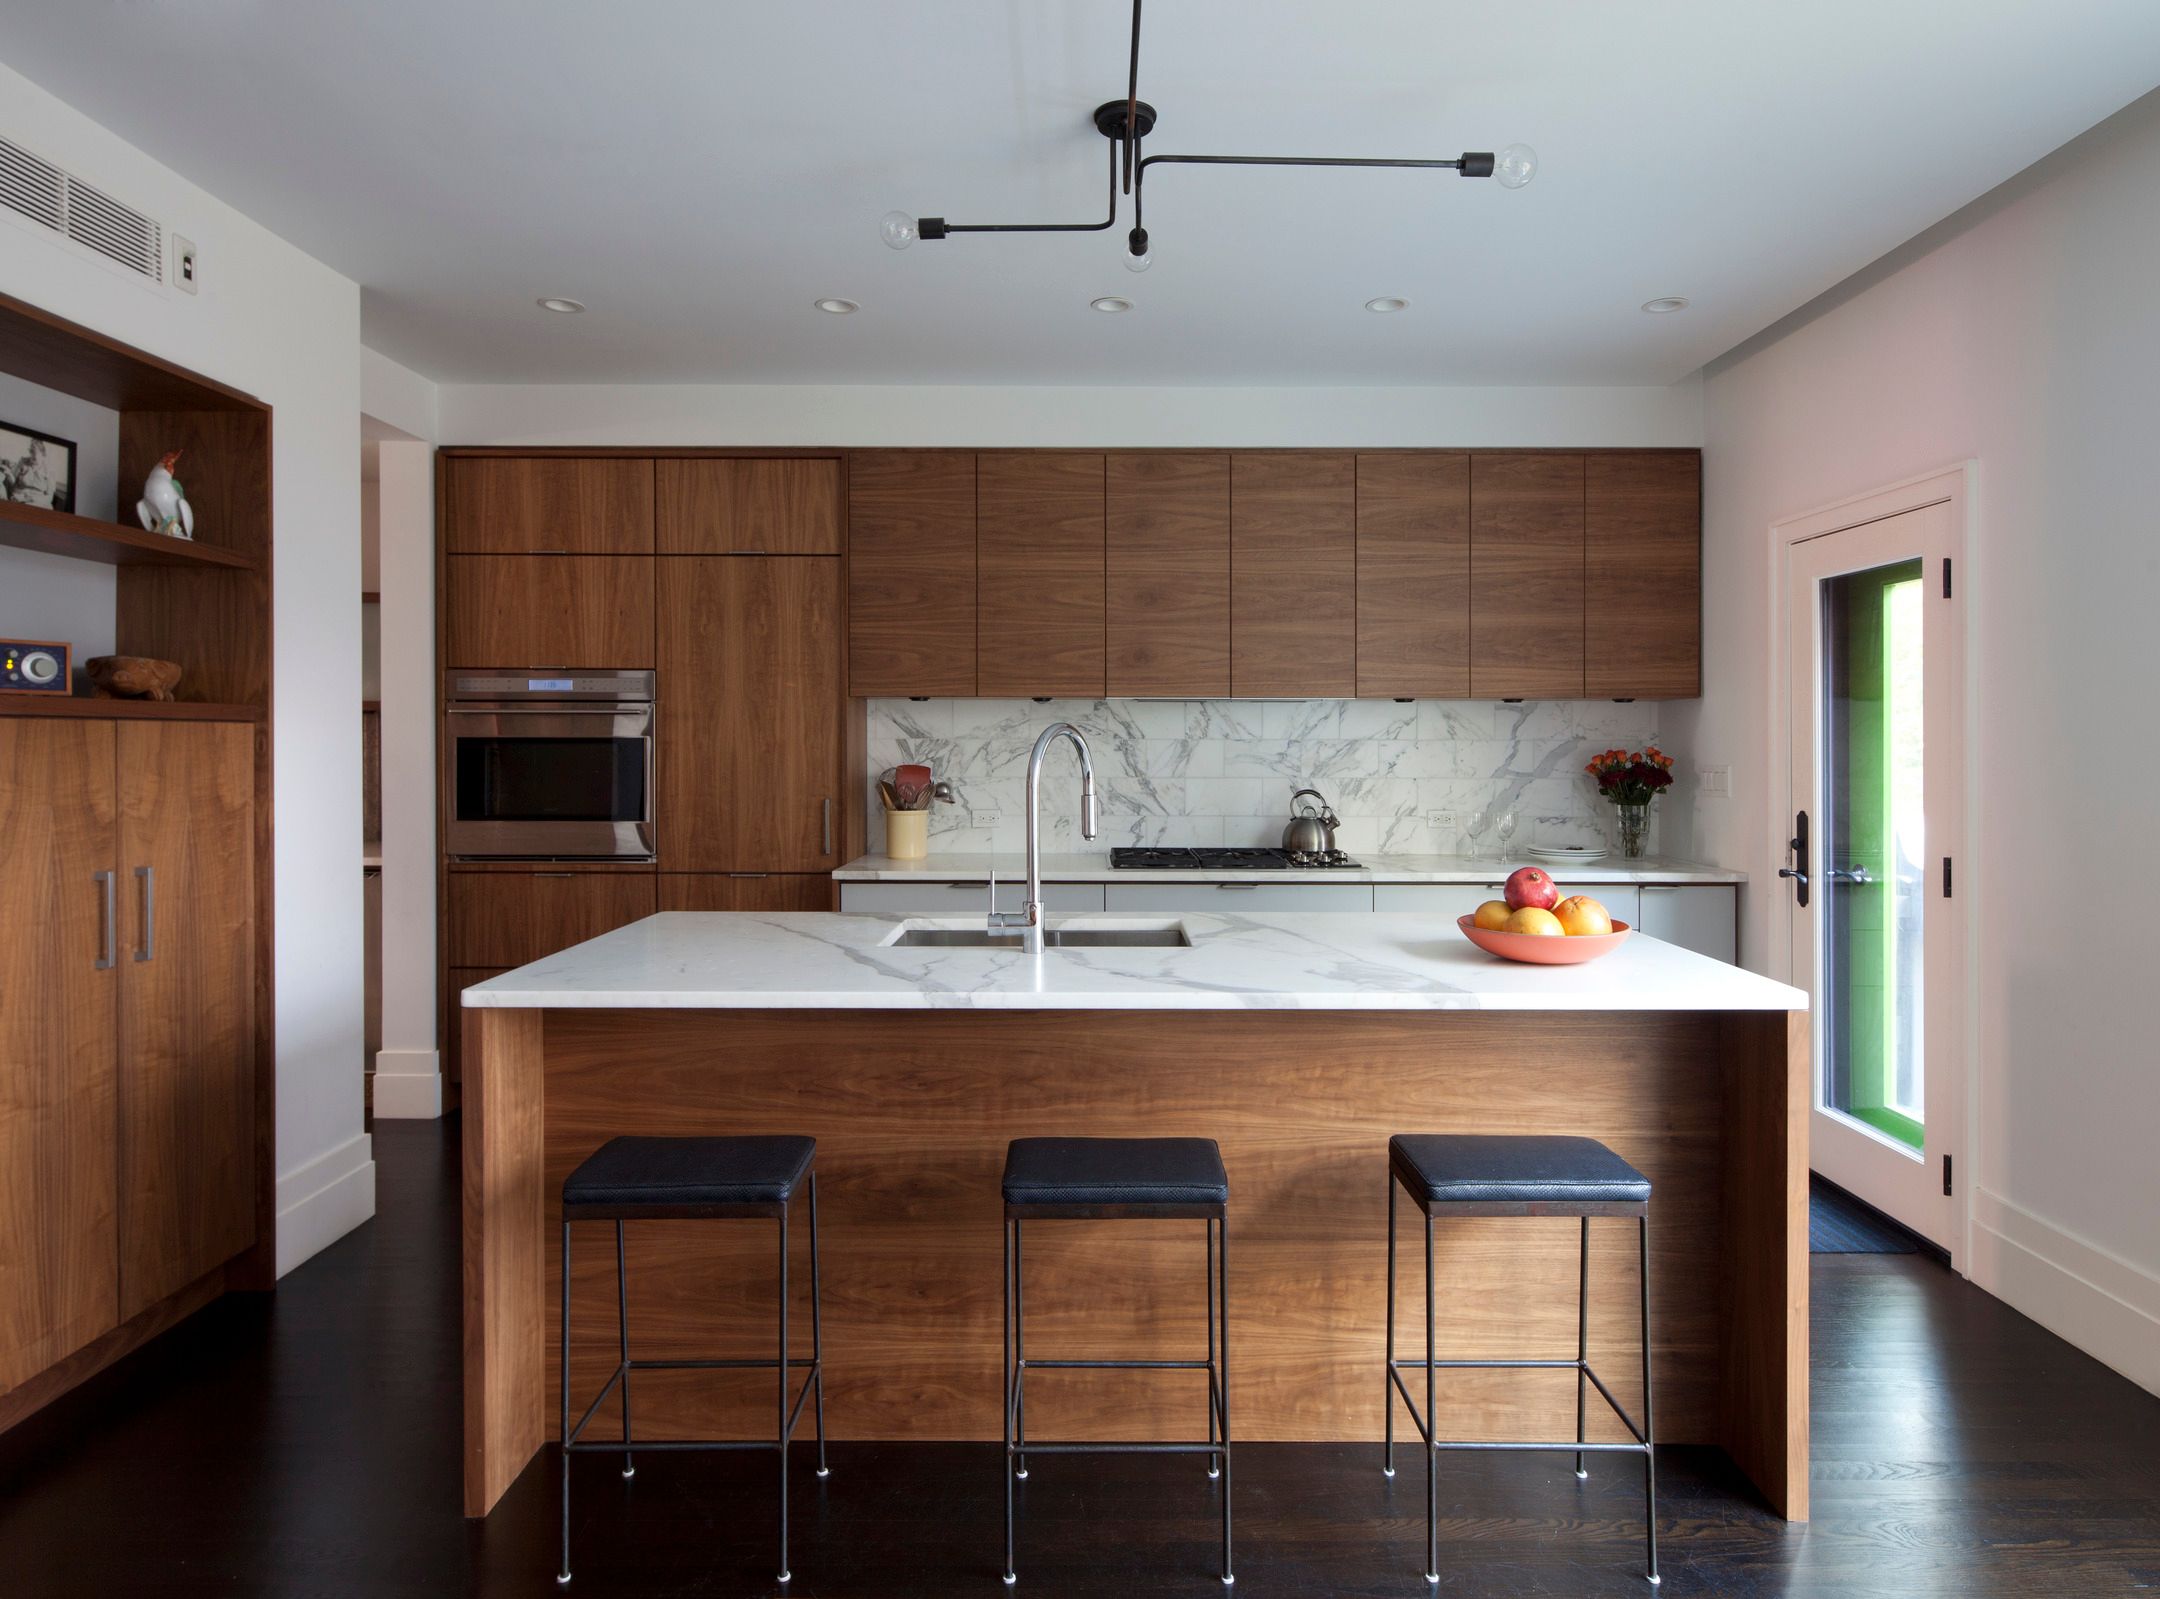 Boerum Hill Greek Revival, No. 1 Kitchen Cabinetry